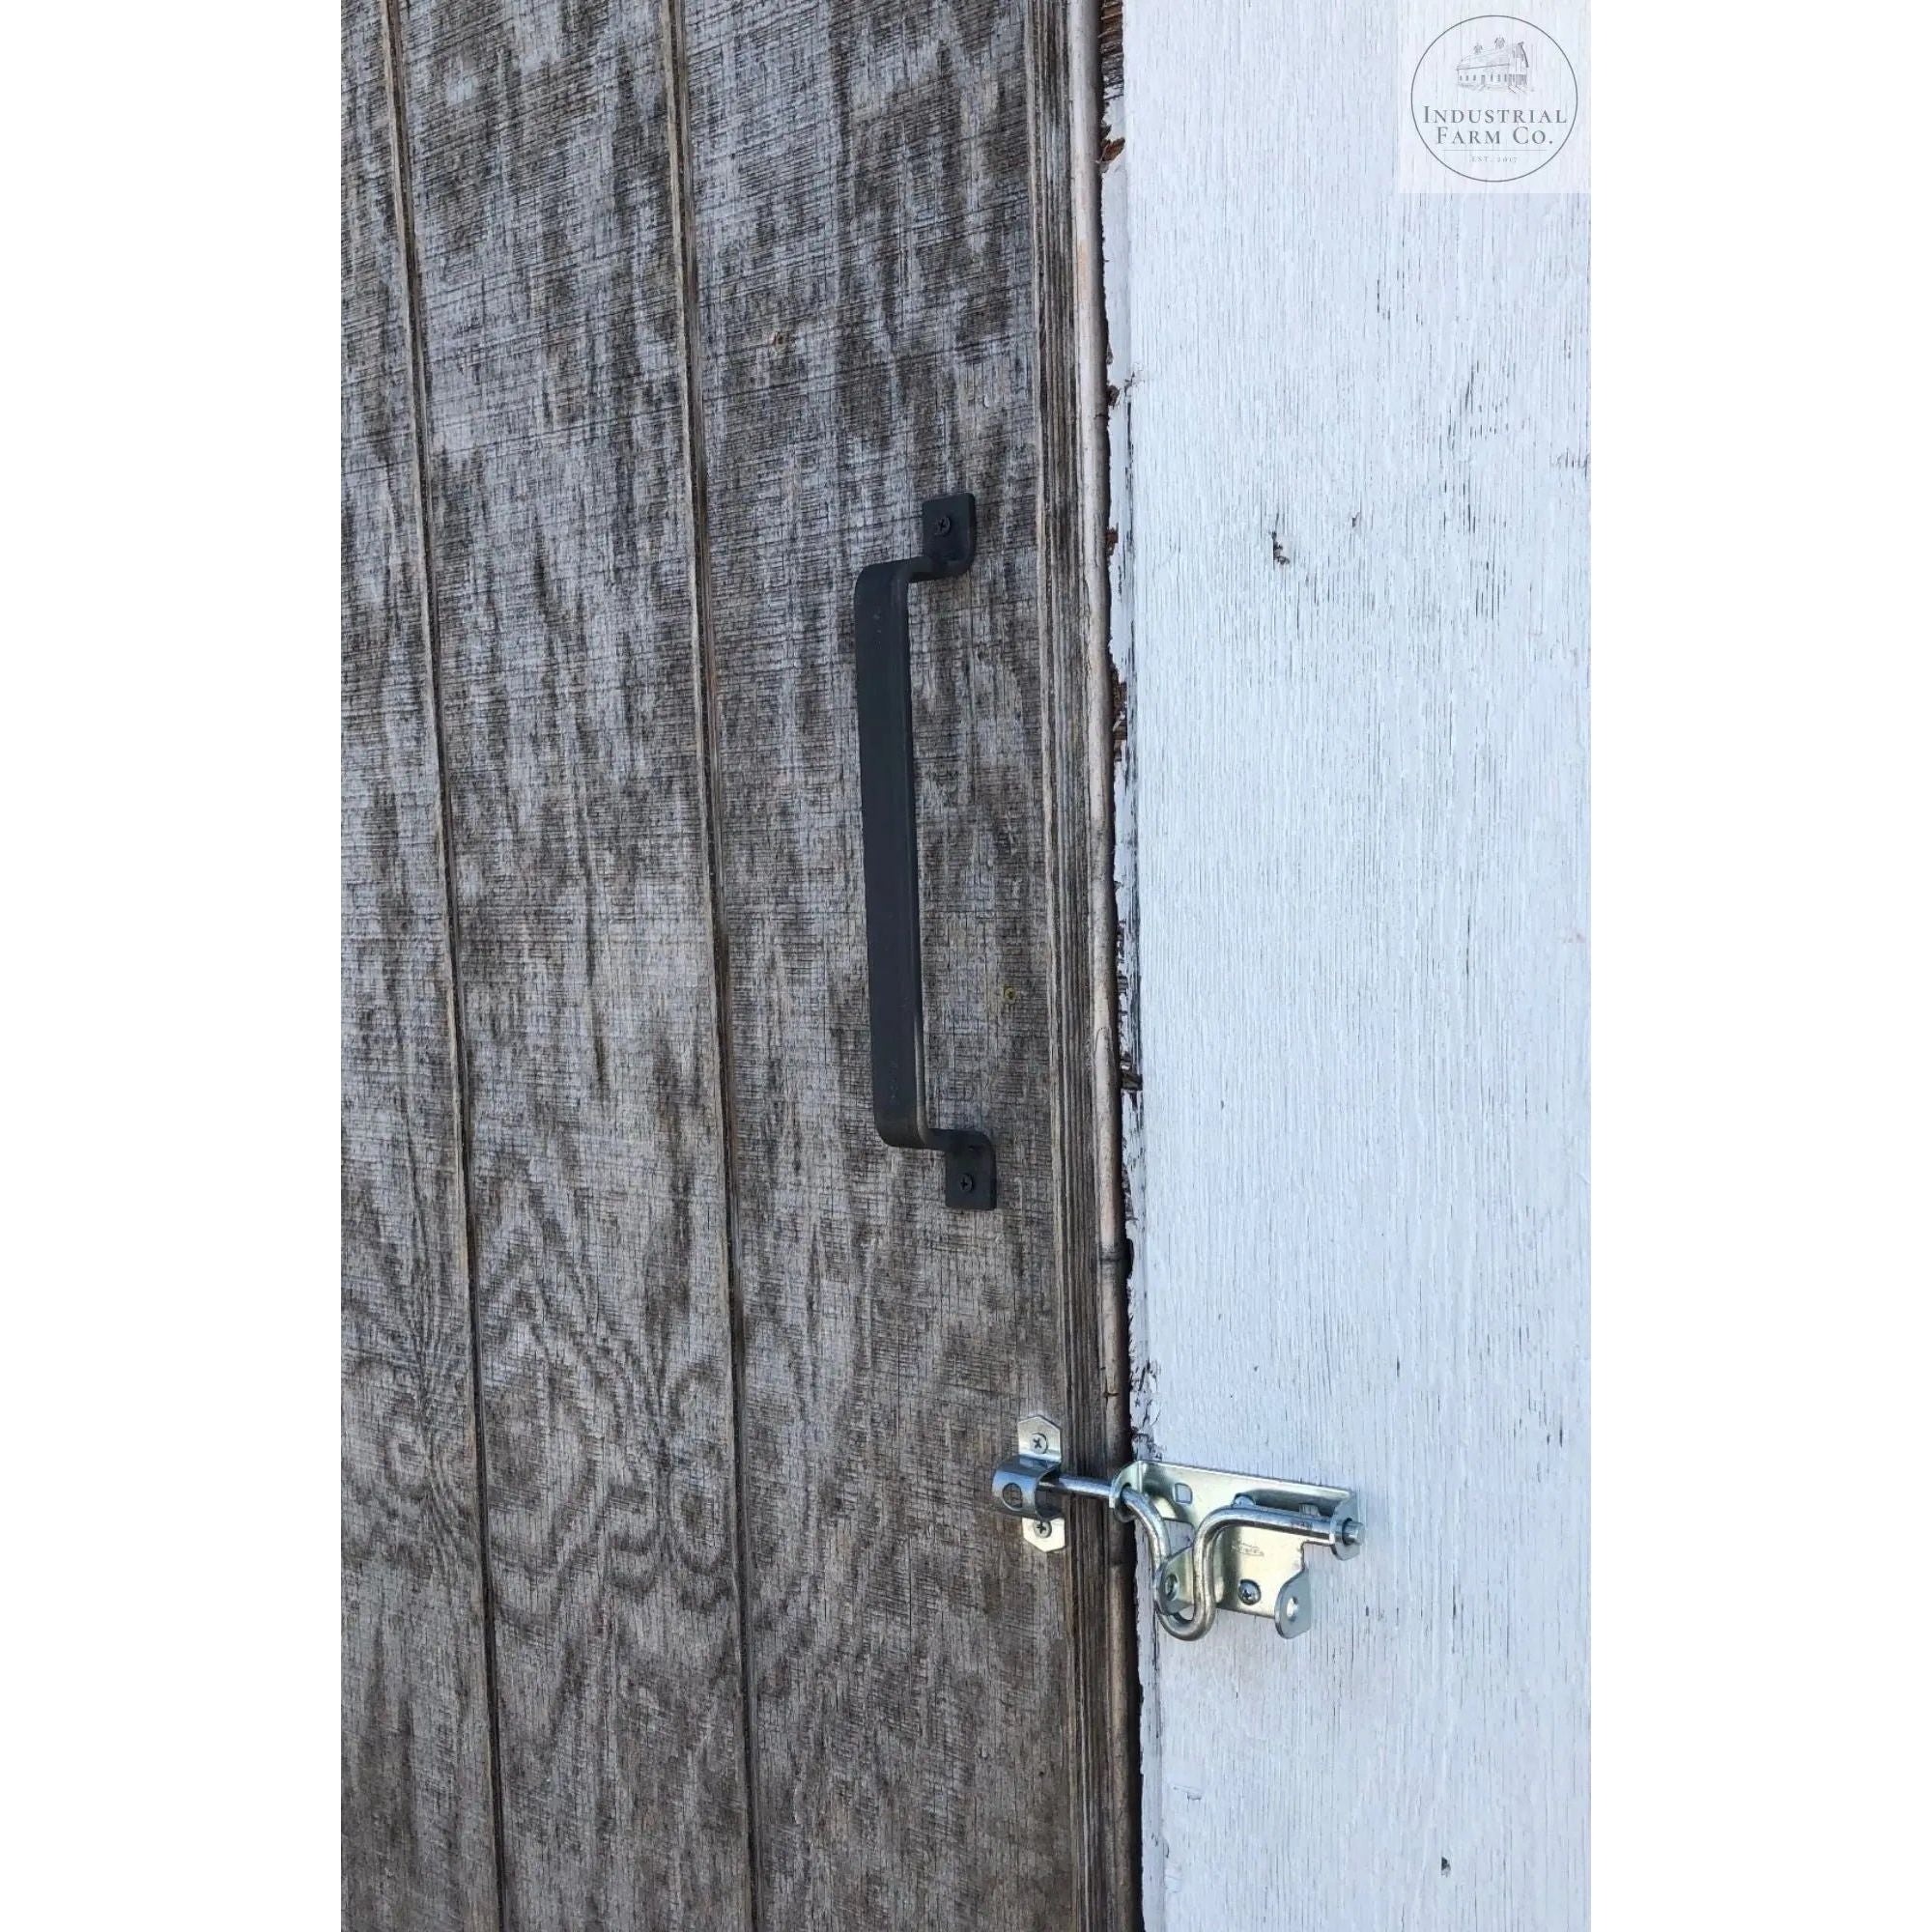 The Sagamore Hill Pull Door Handle/ Pull Raw - Uncoated Metal   | Industrial Farm Co